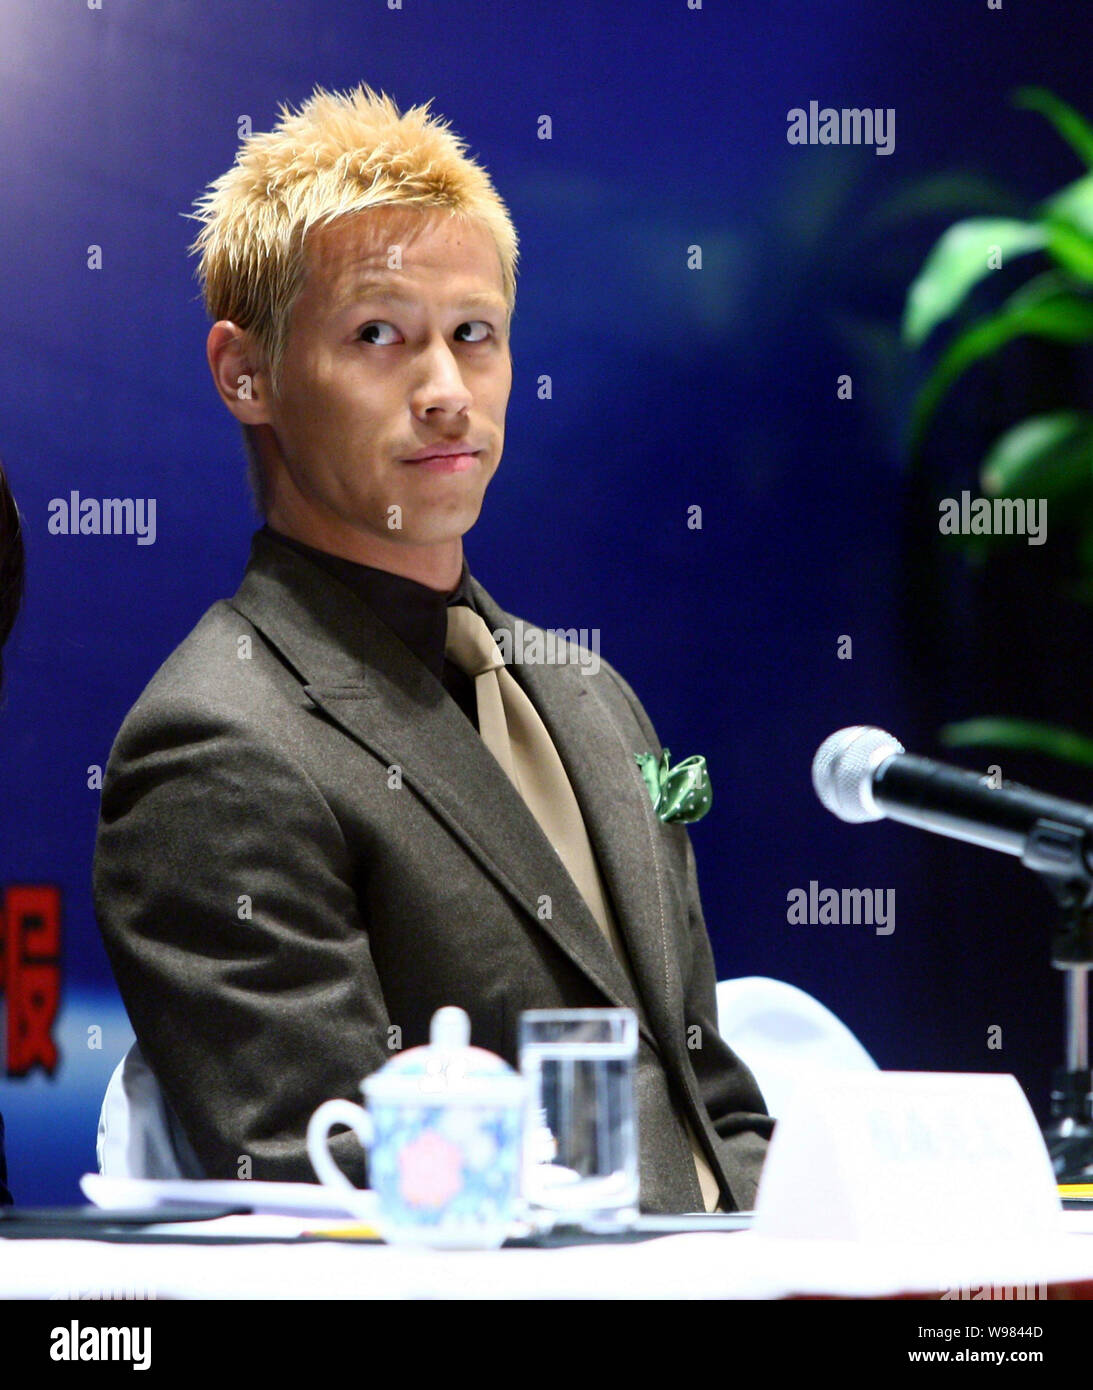 Japanese football player Keisuke Honda attends a press conference for the China-Japan Youth Football Exchange Programme in Shanghai, China, 16 Decembe Stock Photo